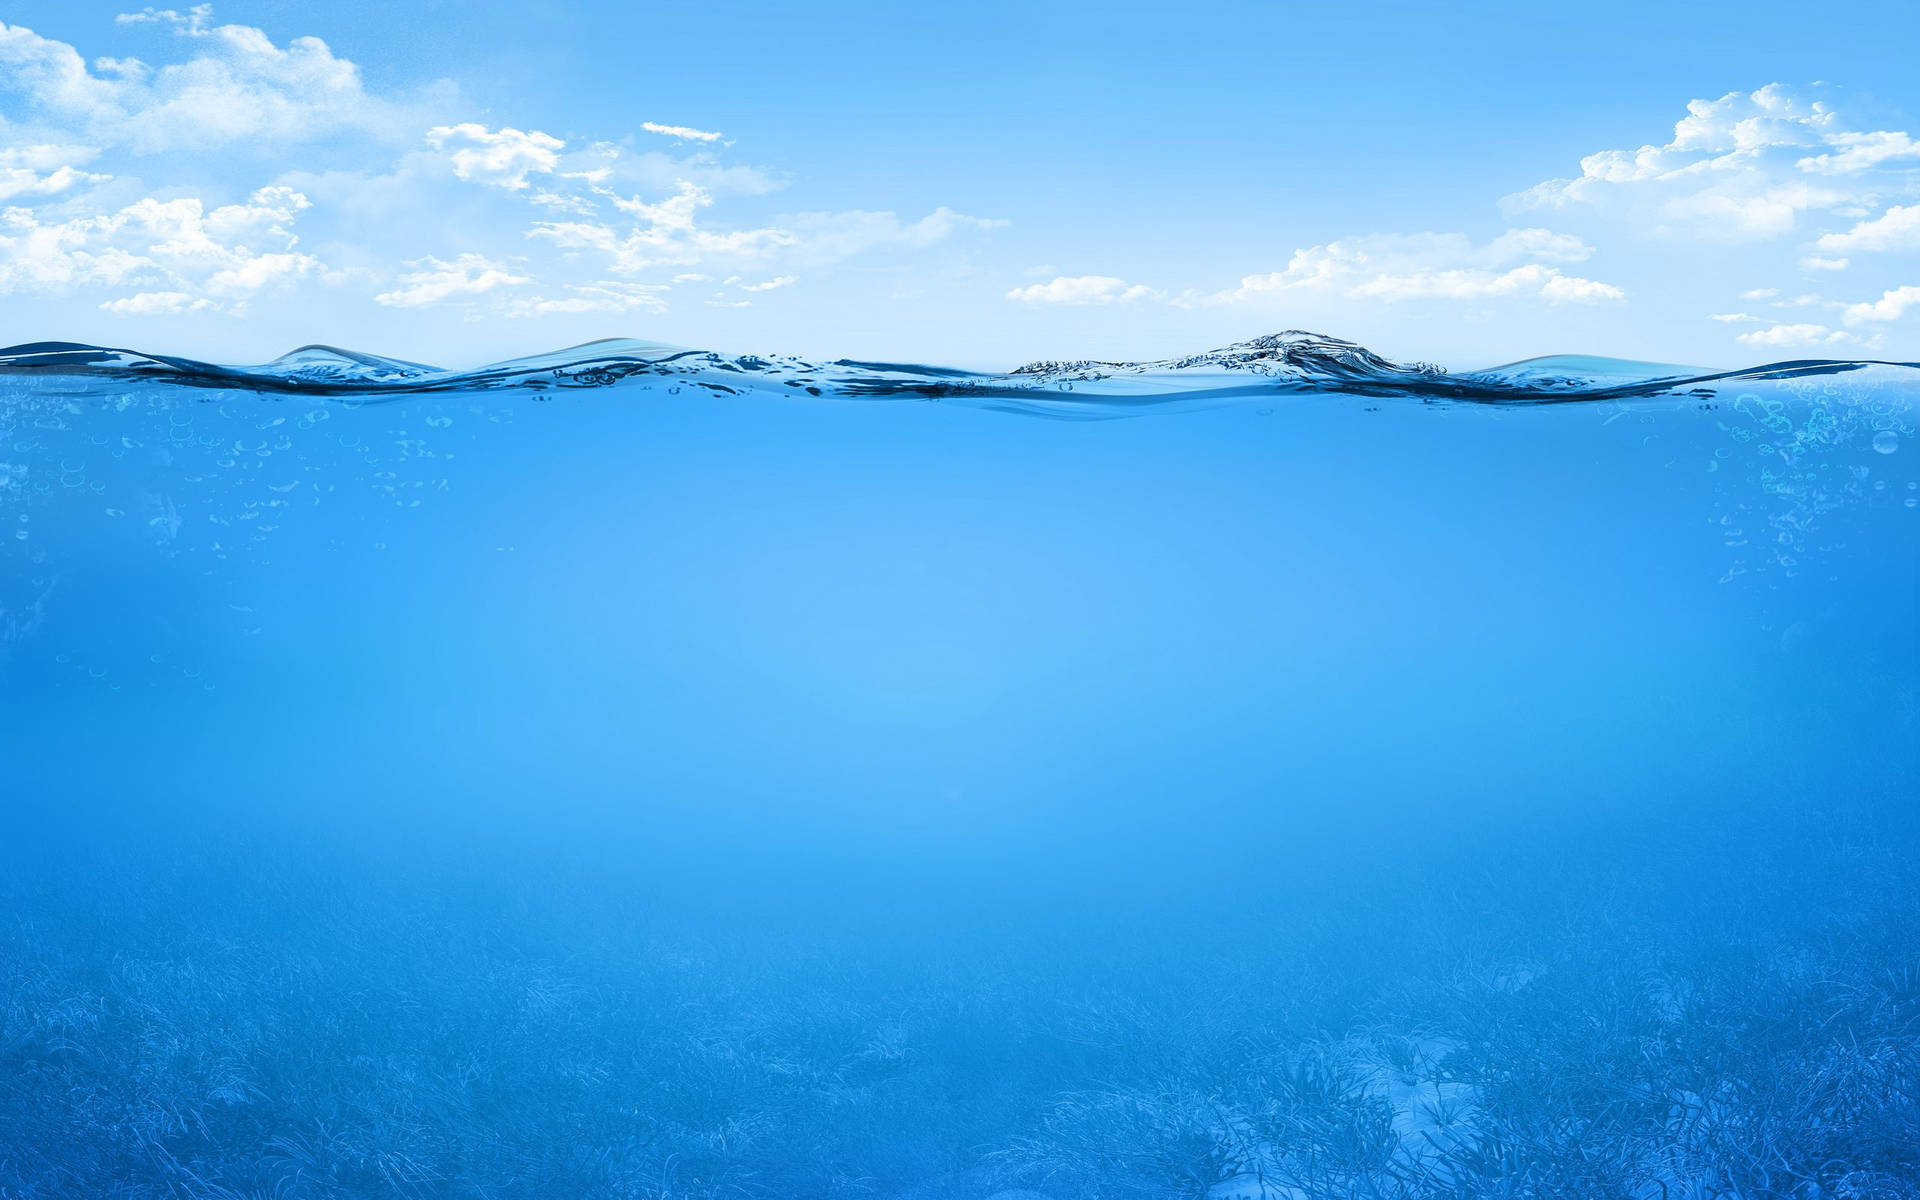 Water 2560X1600 Wallpaper and Background Image